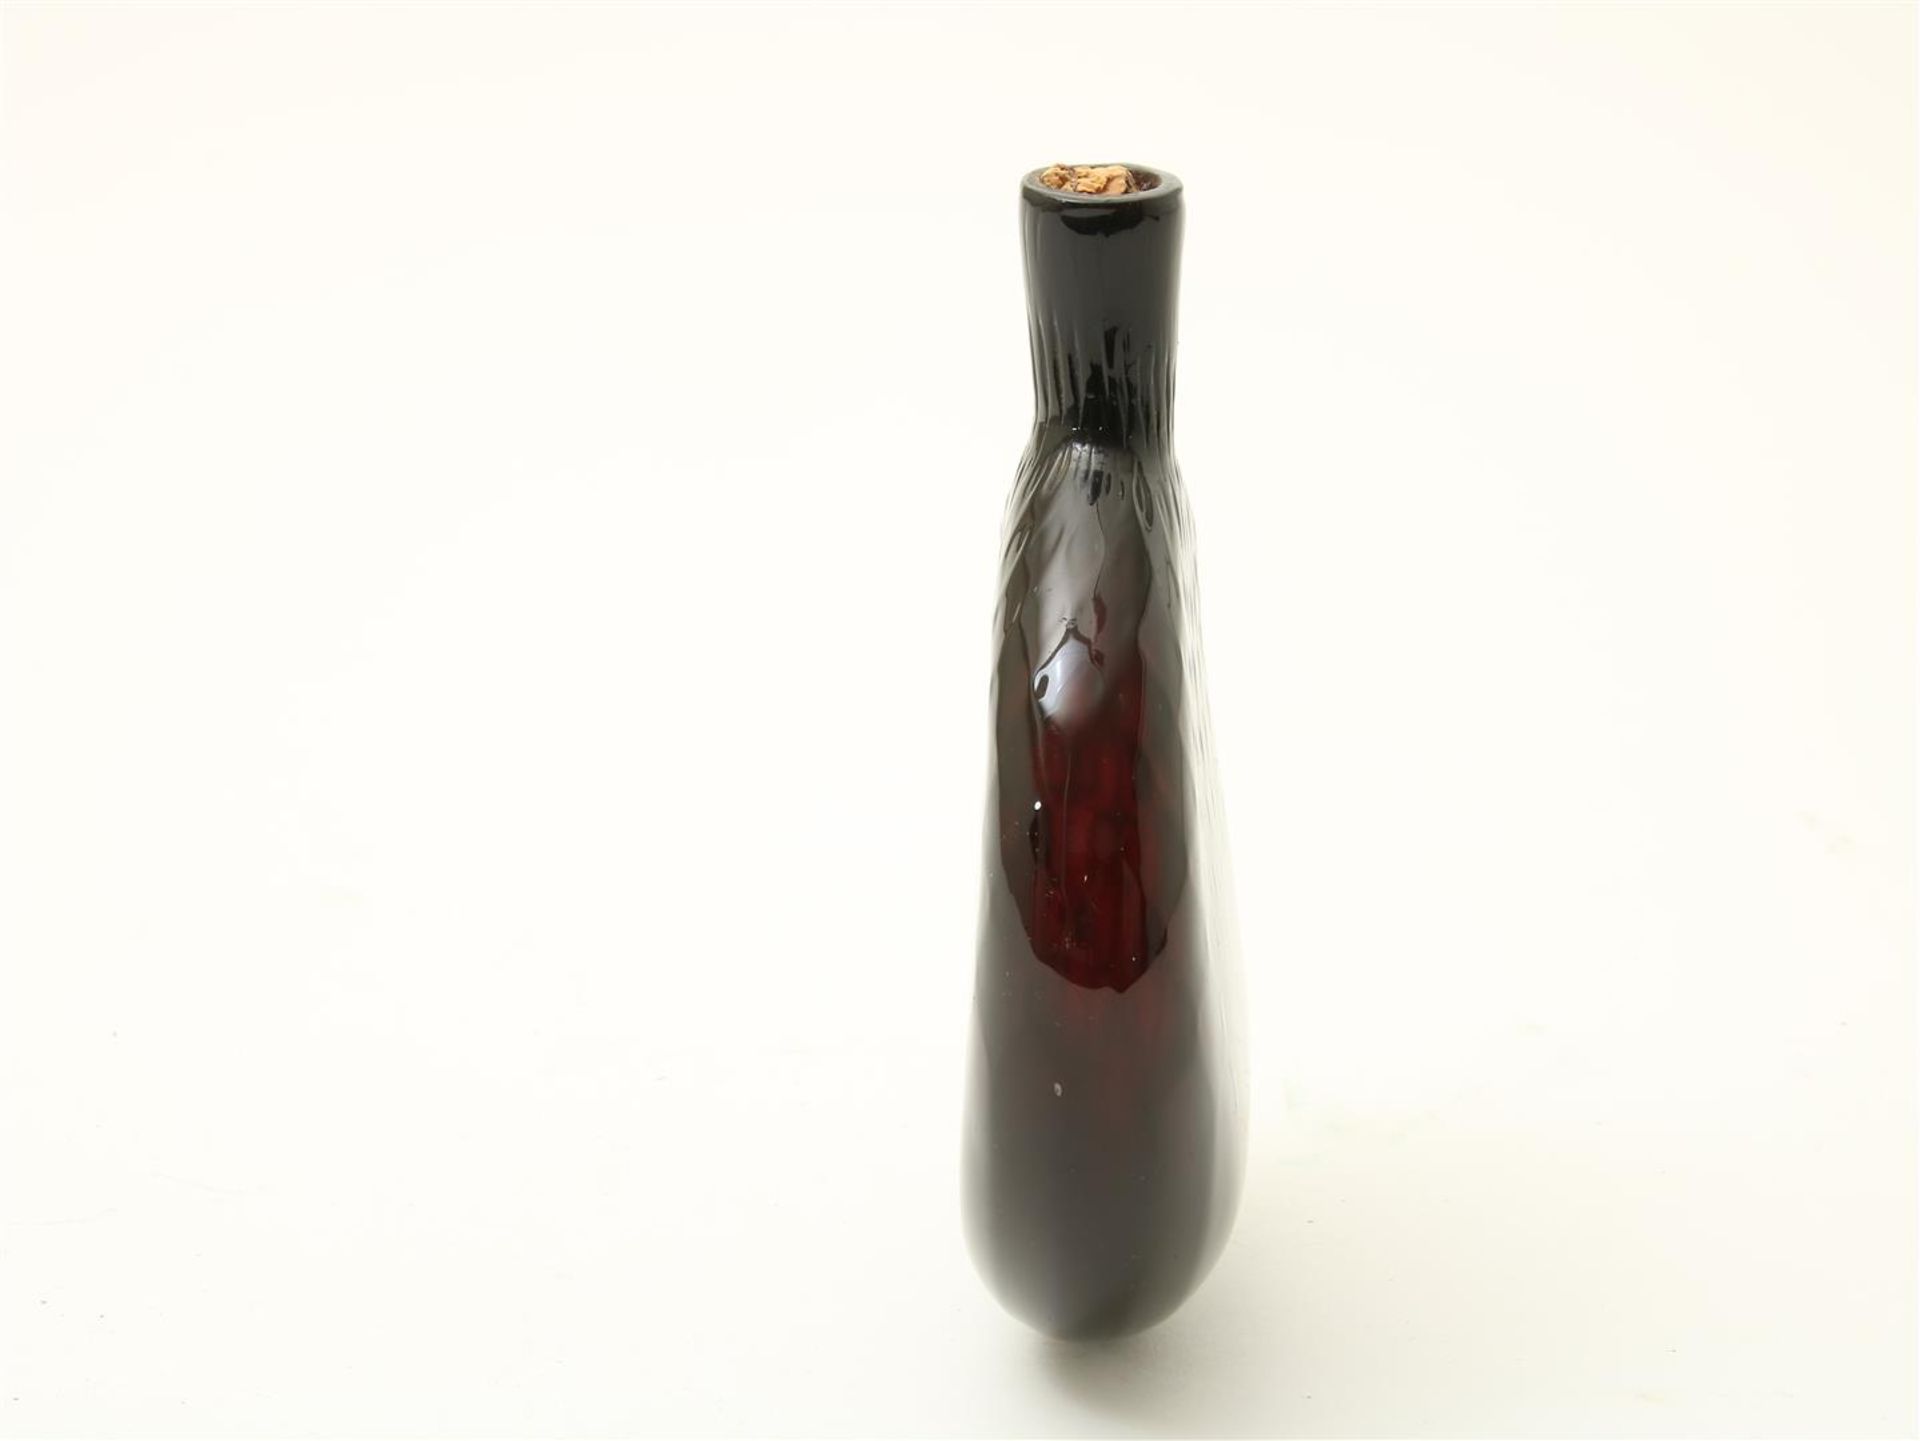 Purple glass bottle, so-called Stiegel Flask, 18th century, height 16 cm. - Image 2 of 3